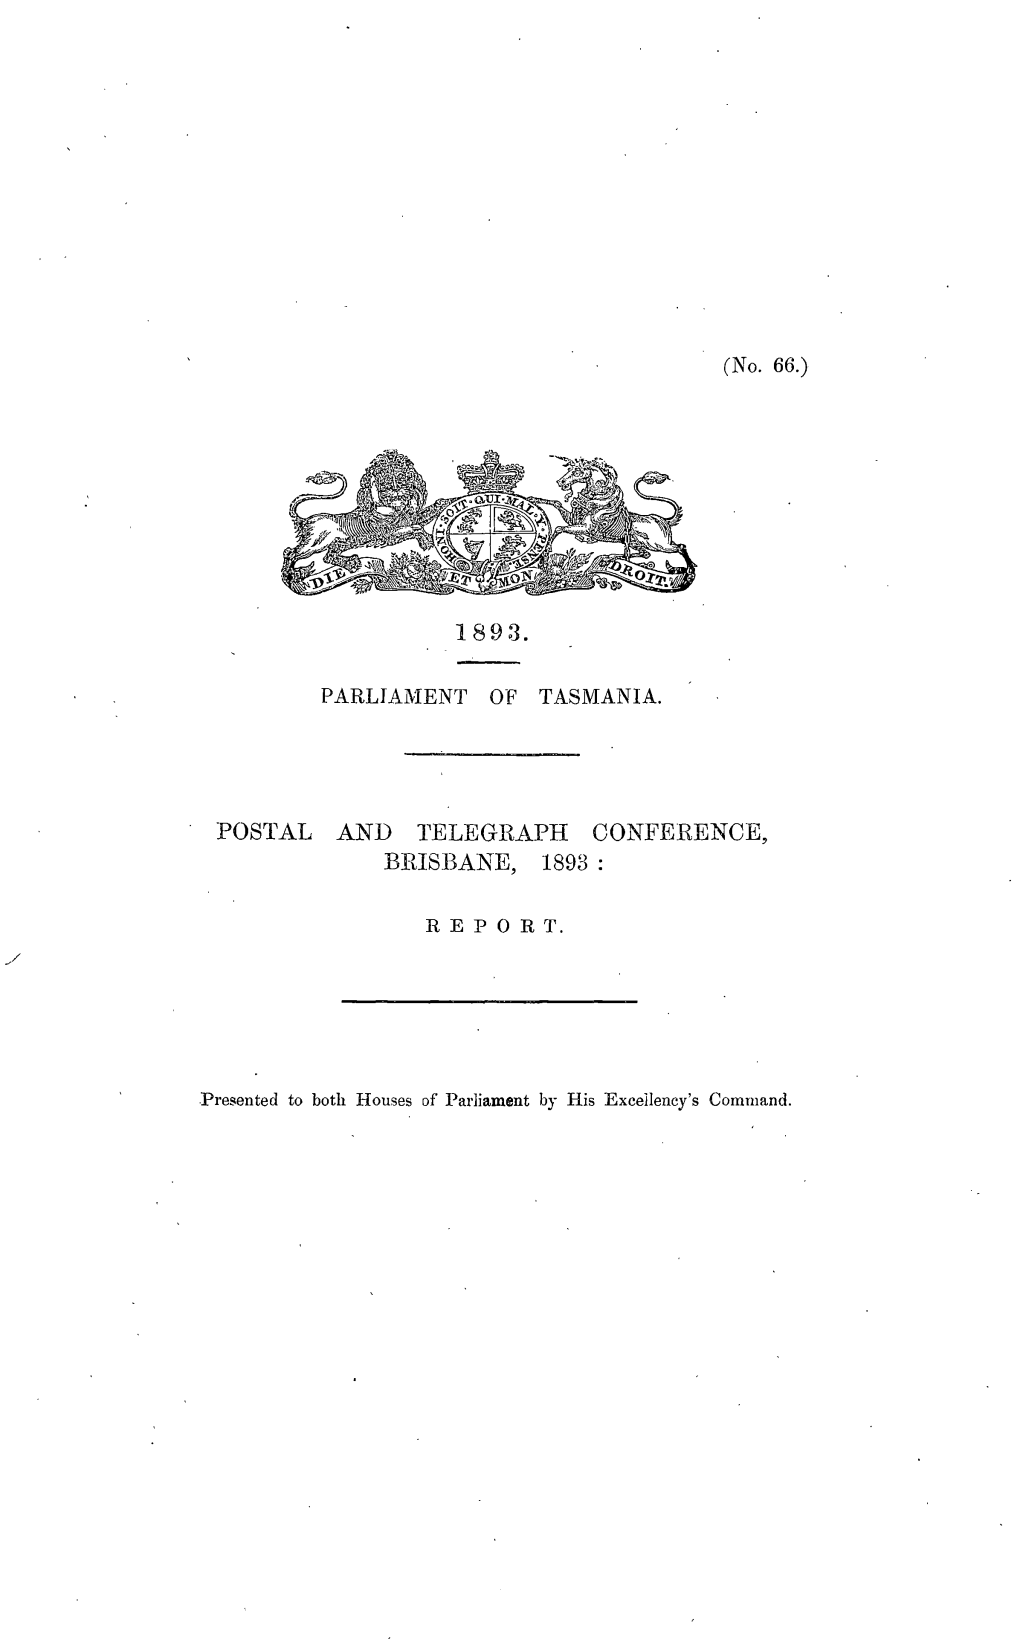 Postal and Telegraph Conference Brisbane 1896 Report